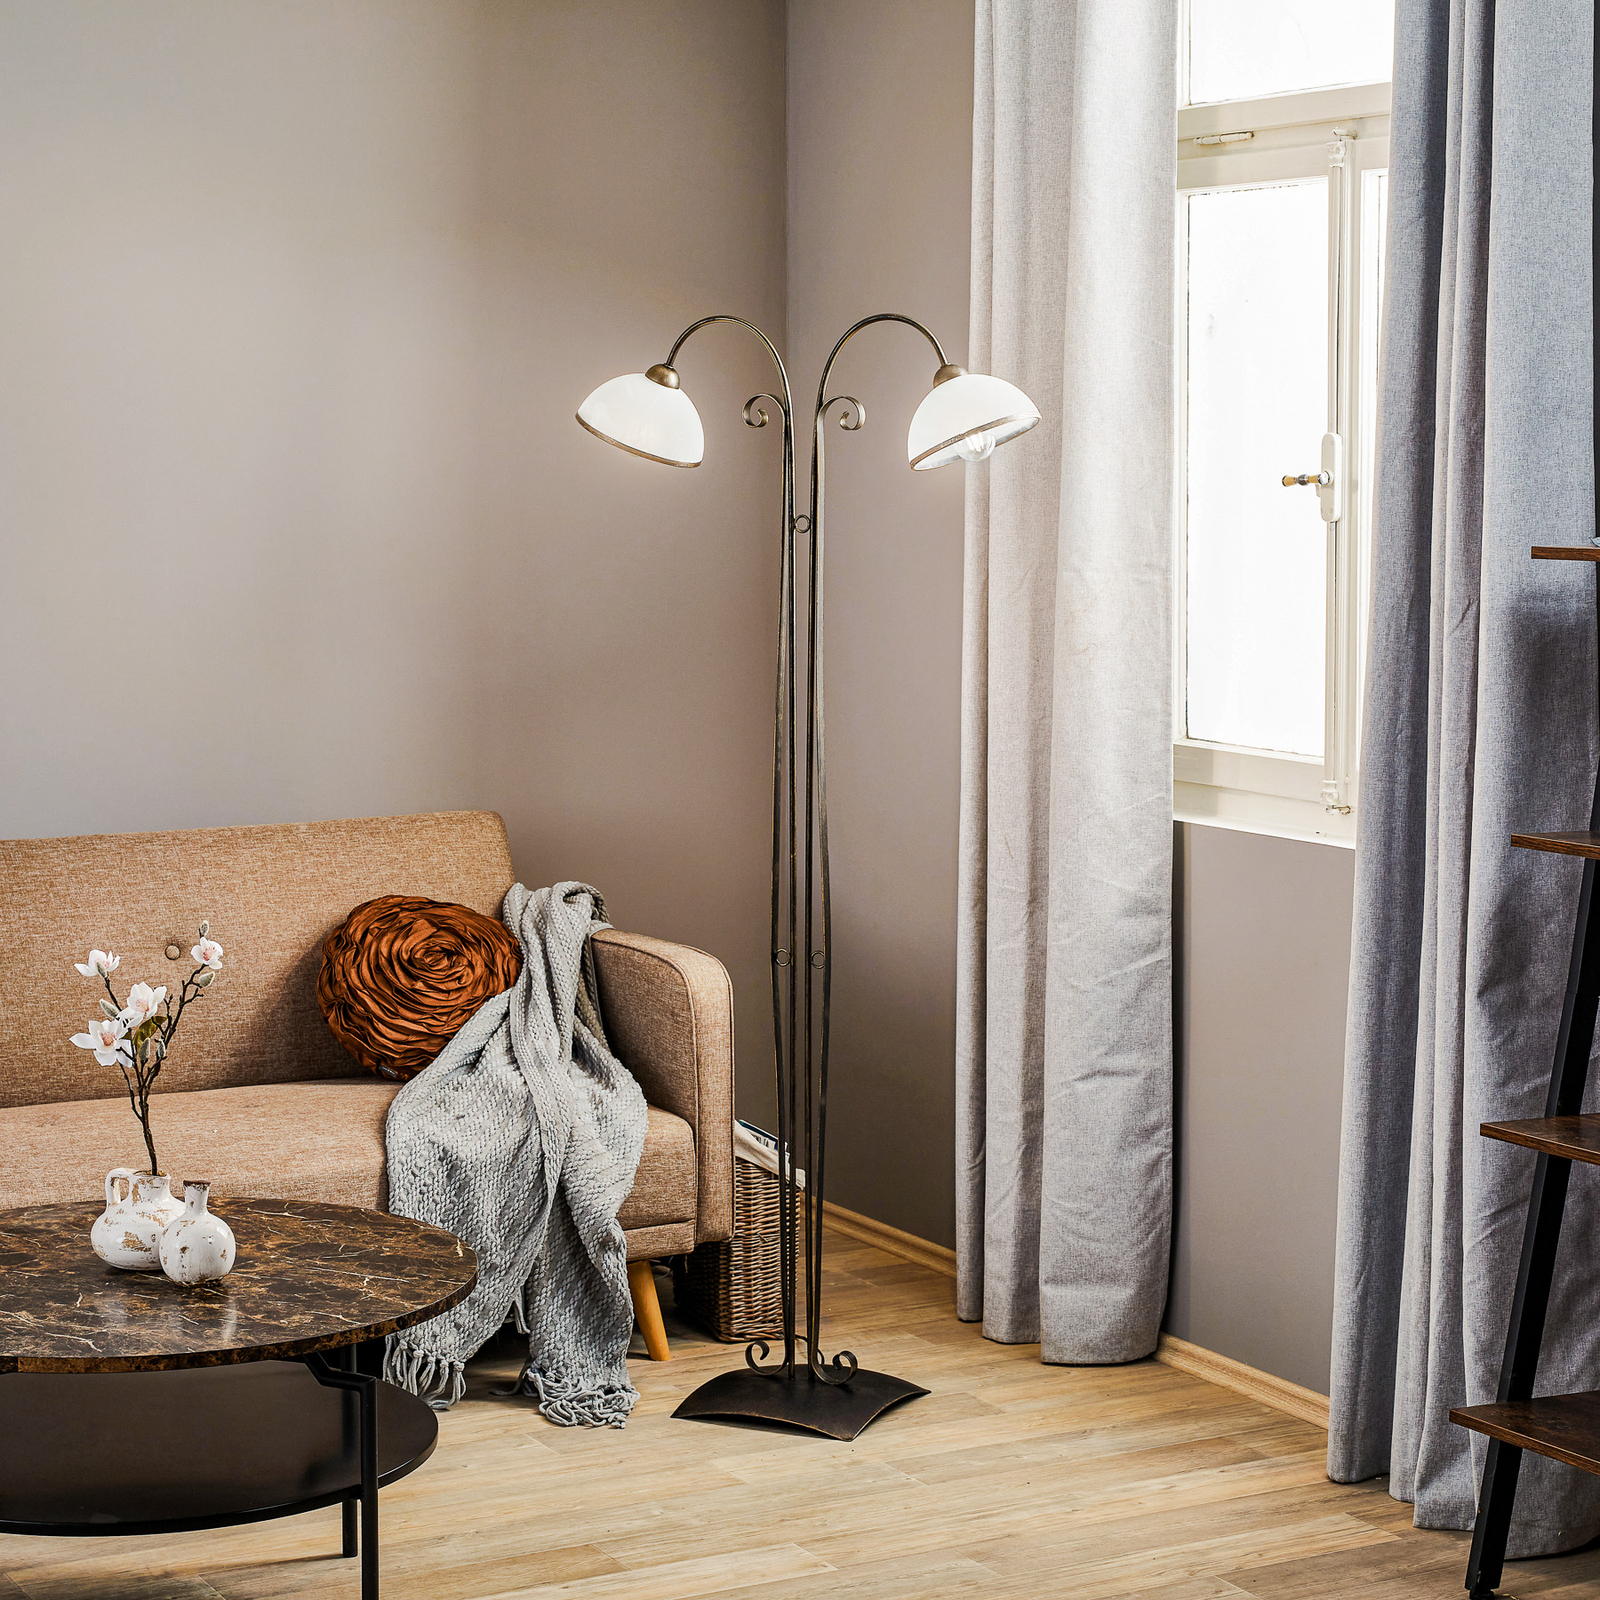 Antica floor lamp in country house style, 2-bulb